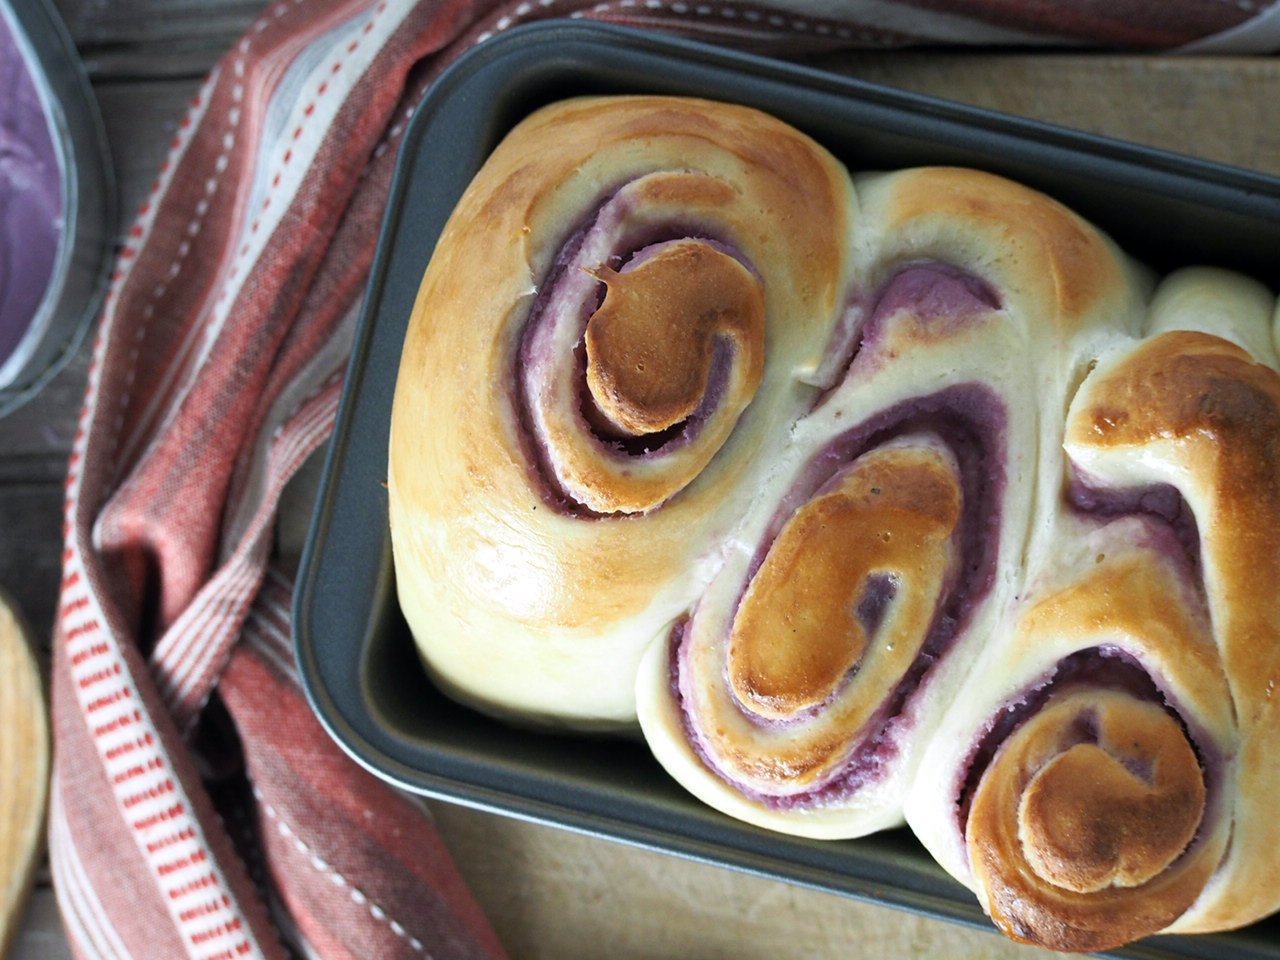 Closer shot of the ube loaf bread, showing the swirls that are filled with the ube filling.